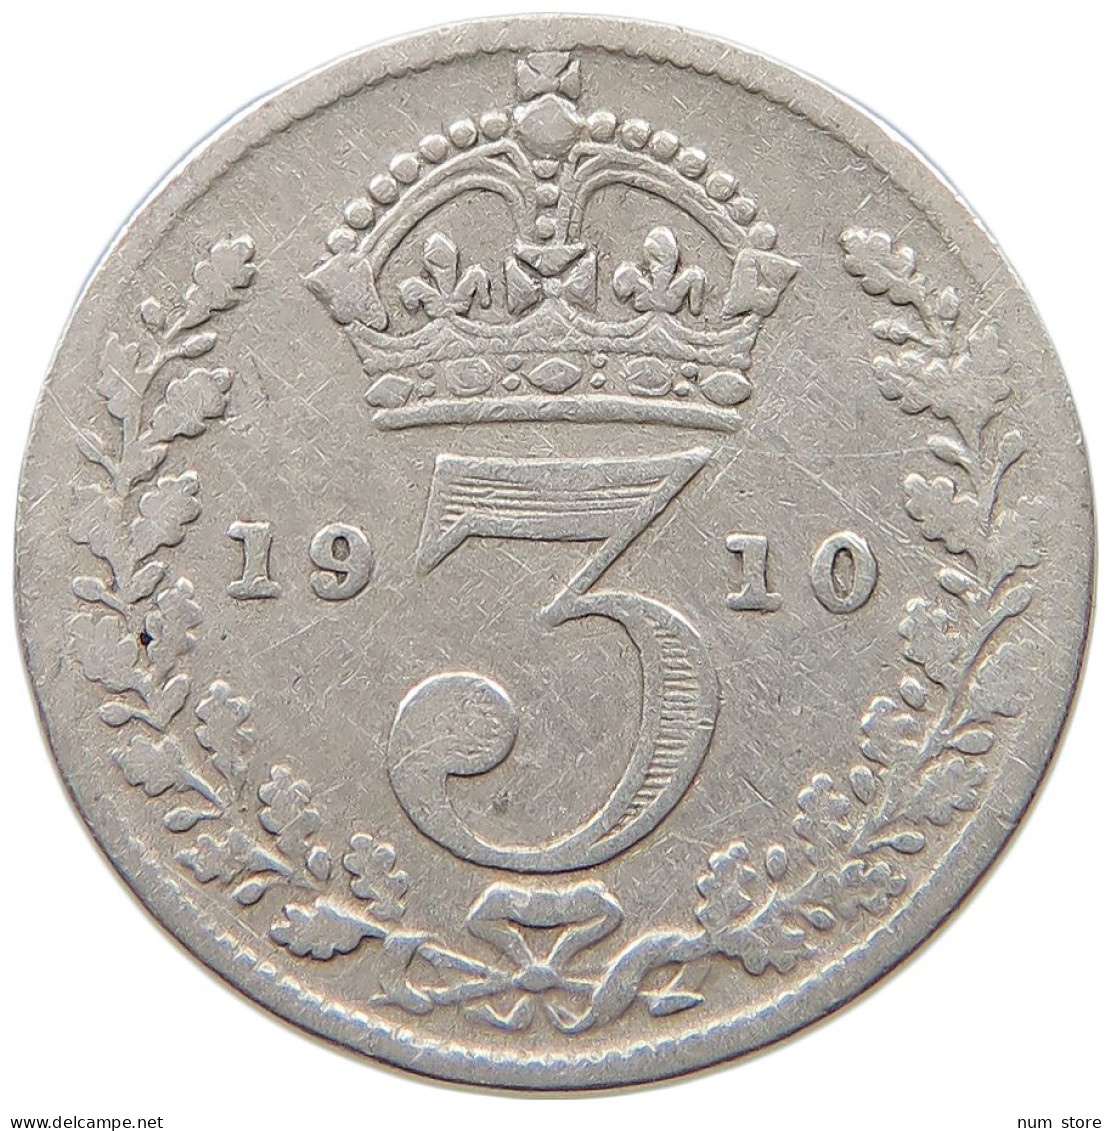 GREAT BRITAIN THREEPENCE 1910 #a034 0043 - F. 3 Pence